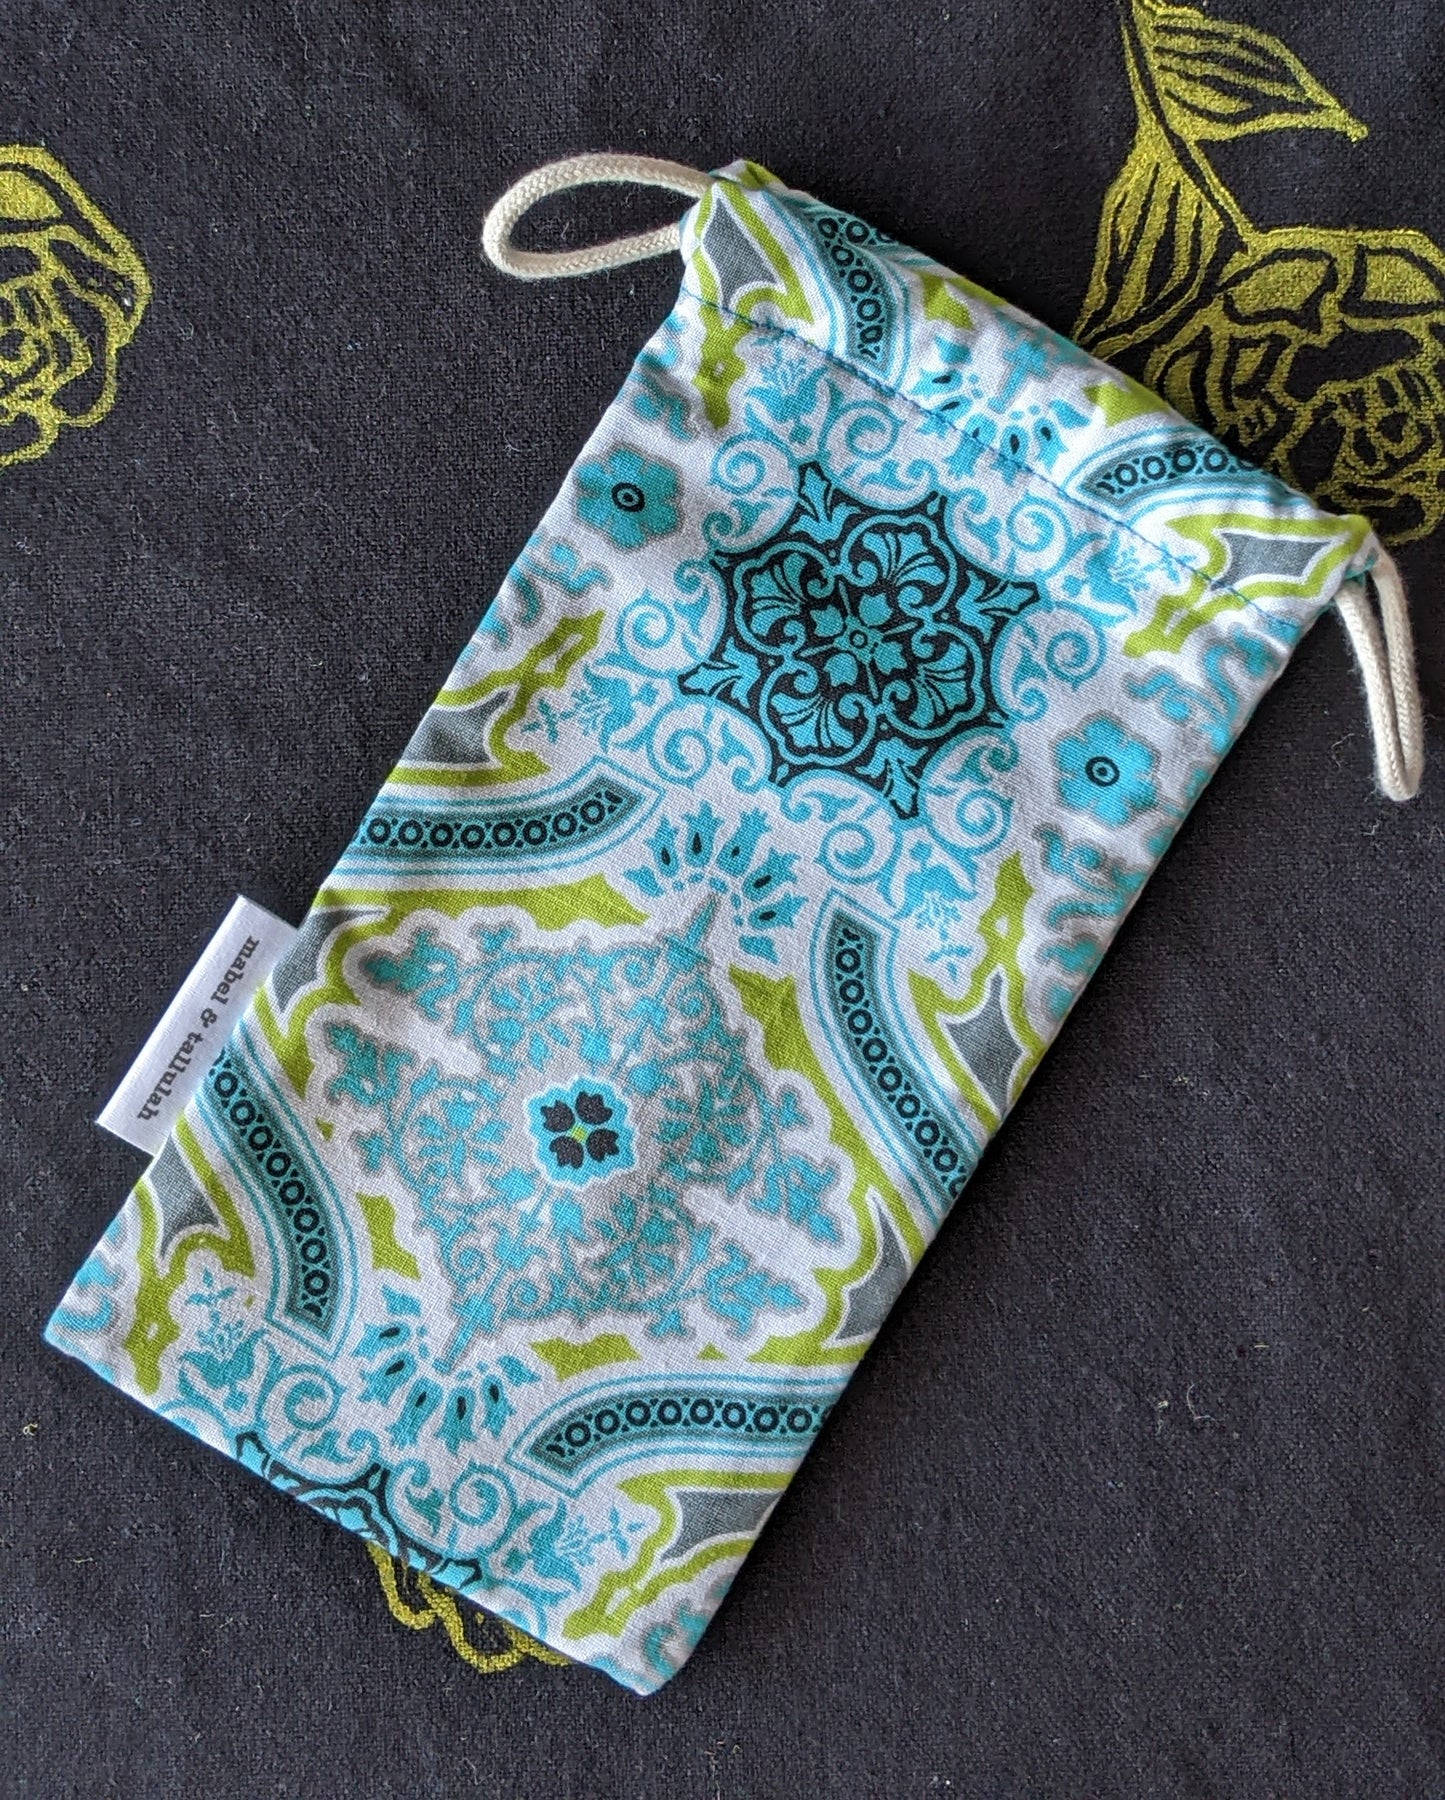 Blue yellow pattern sunglasses cover mini pouch by The Arthly Box